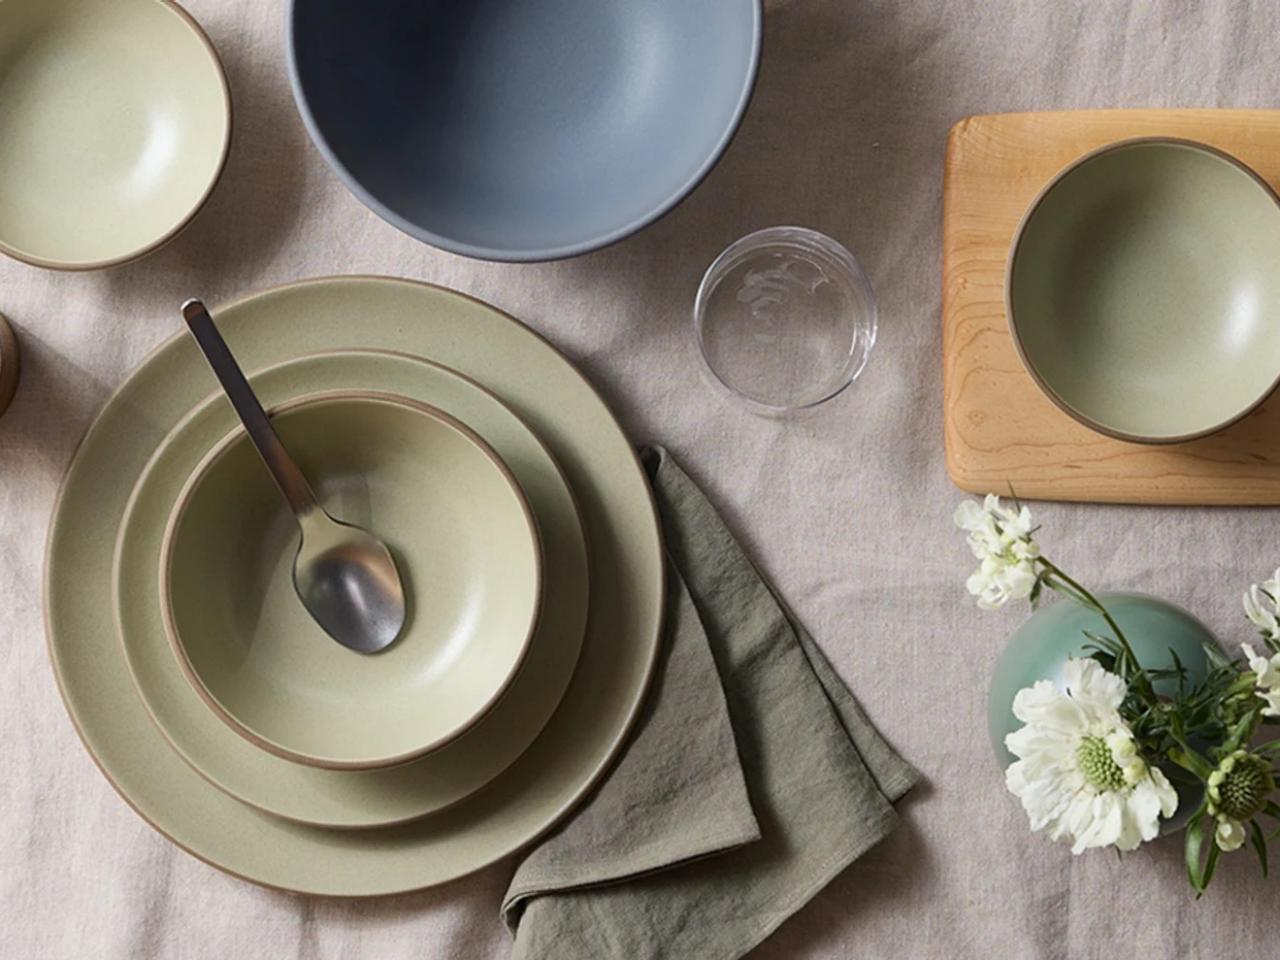 7 Tips for Buying Vintage Kitchenware